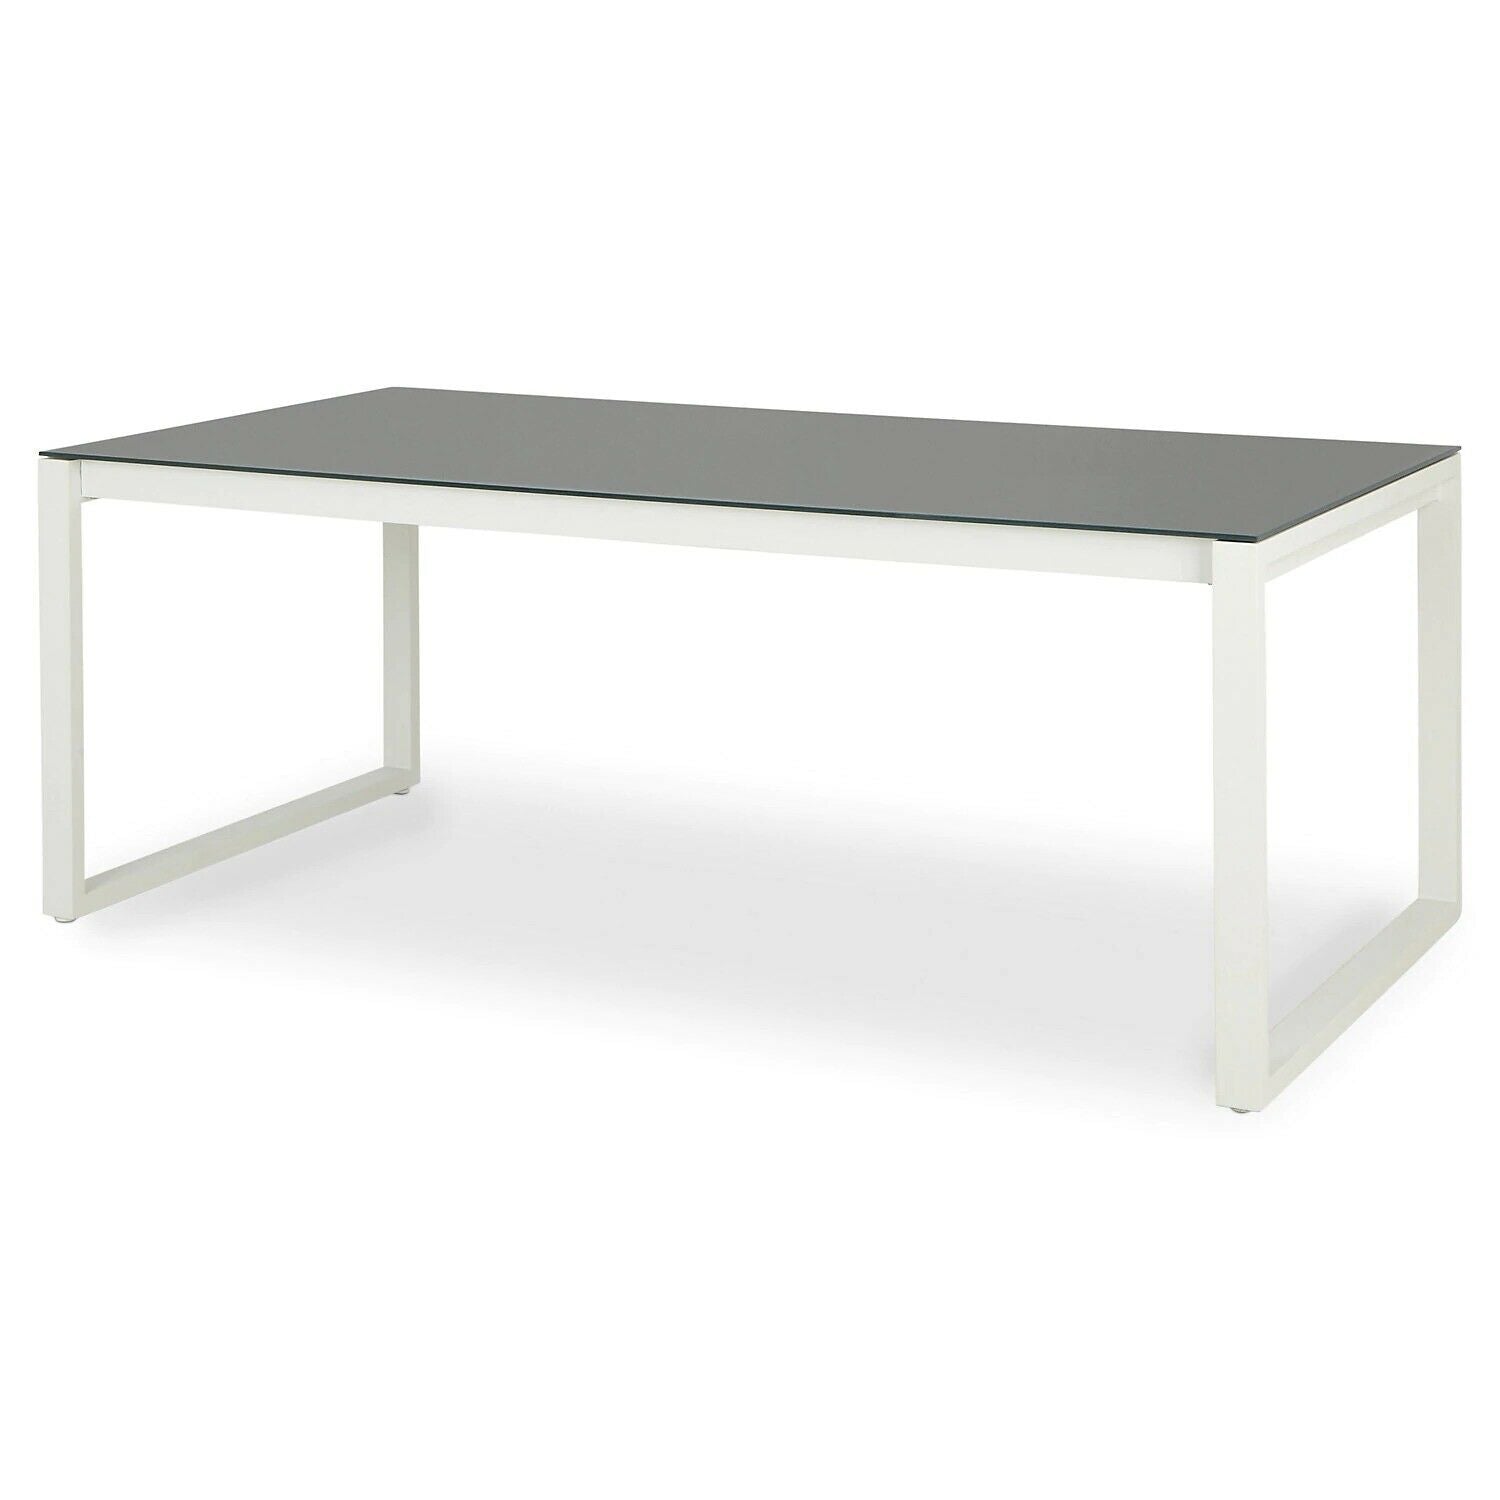 Riccia Metal 4-6 seater Dining table W/out Glass N.o3189